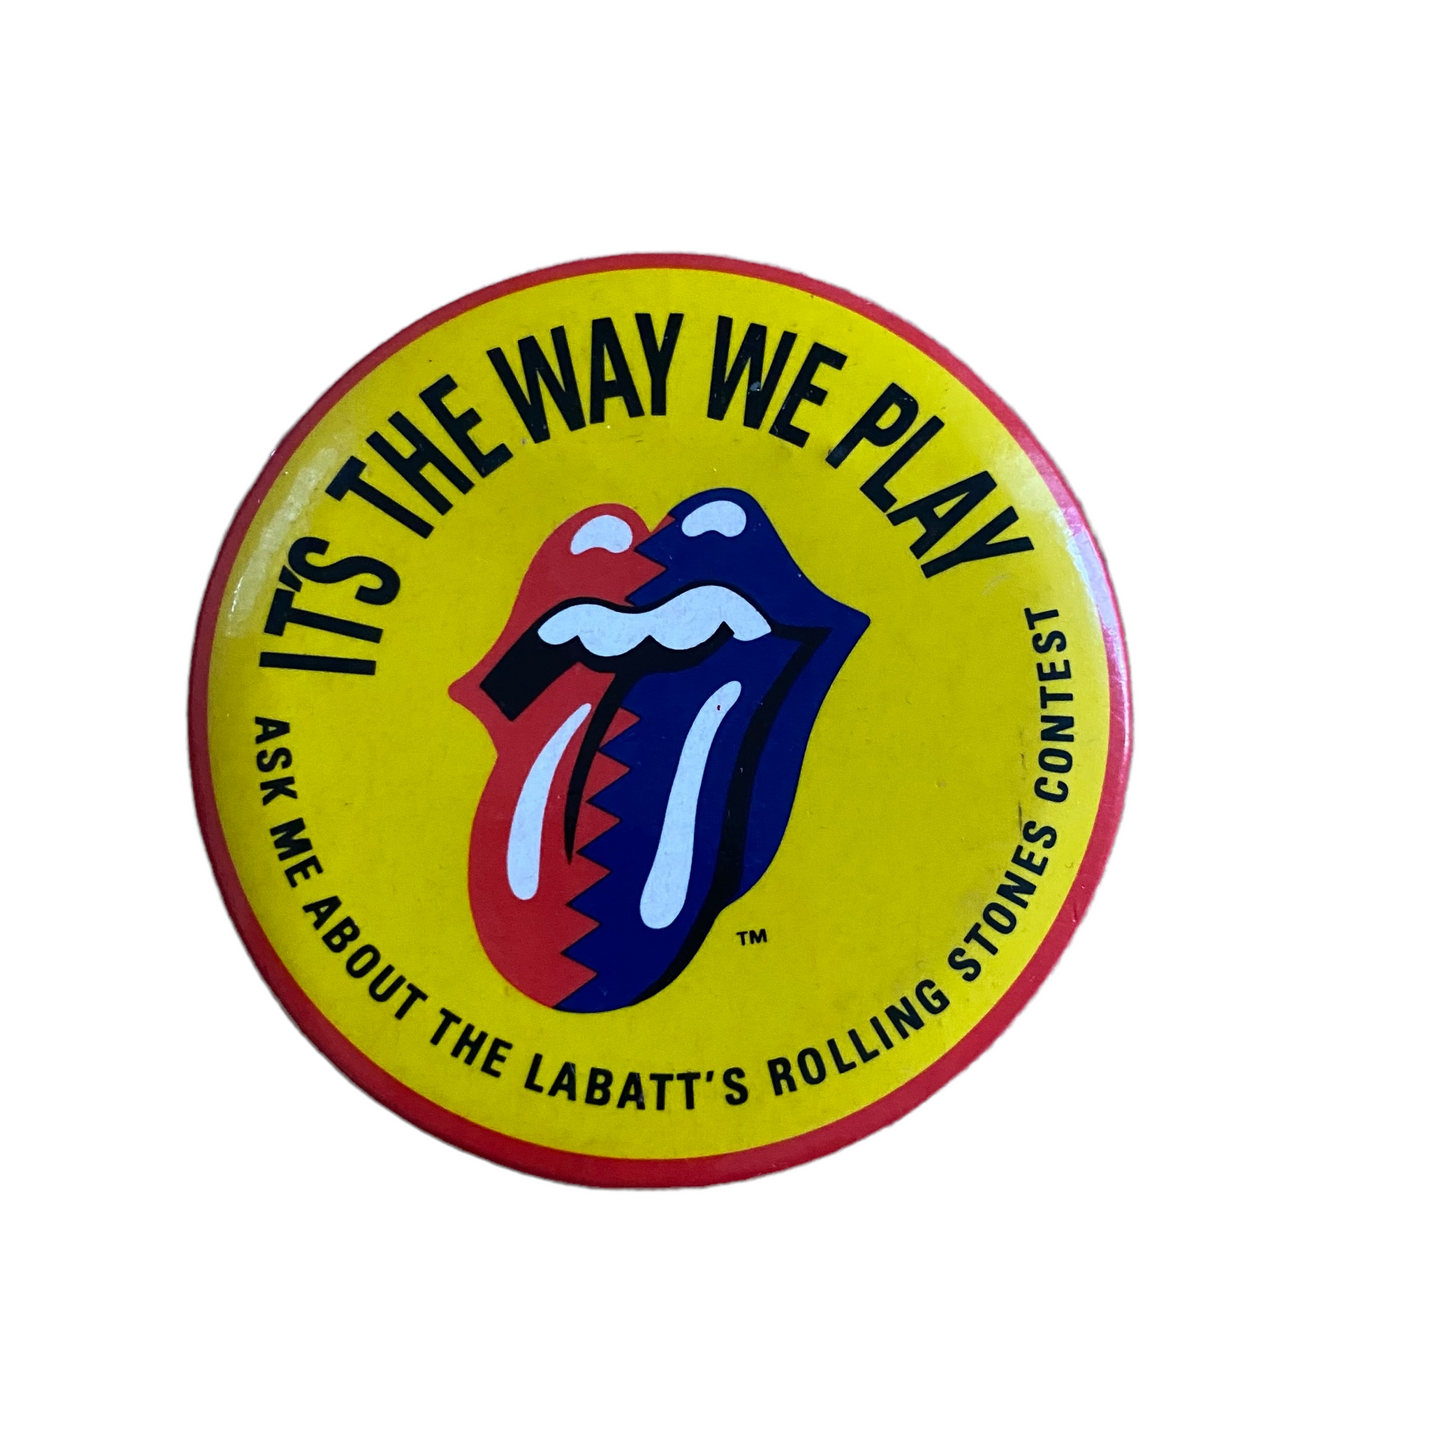 "ROLLING STONES" Event YEllow×Red PinbackButton